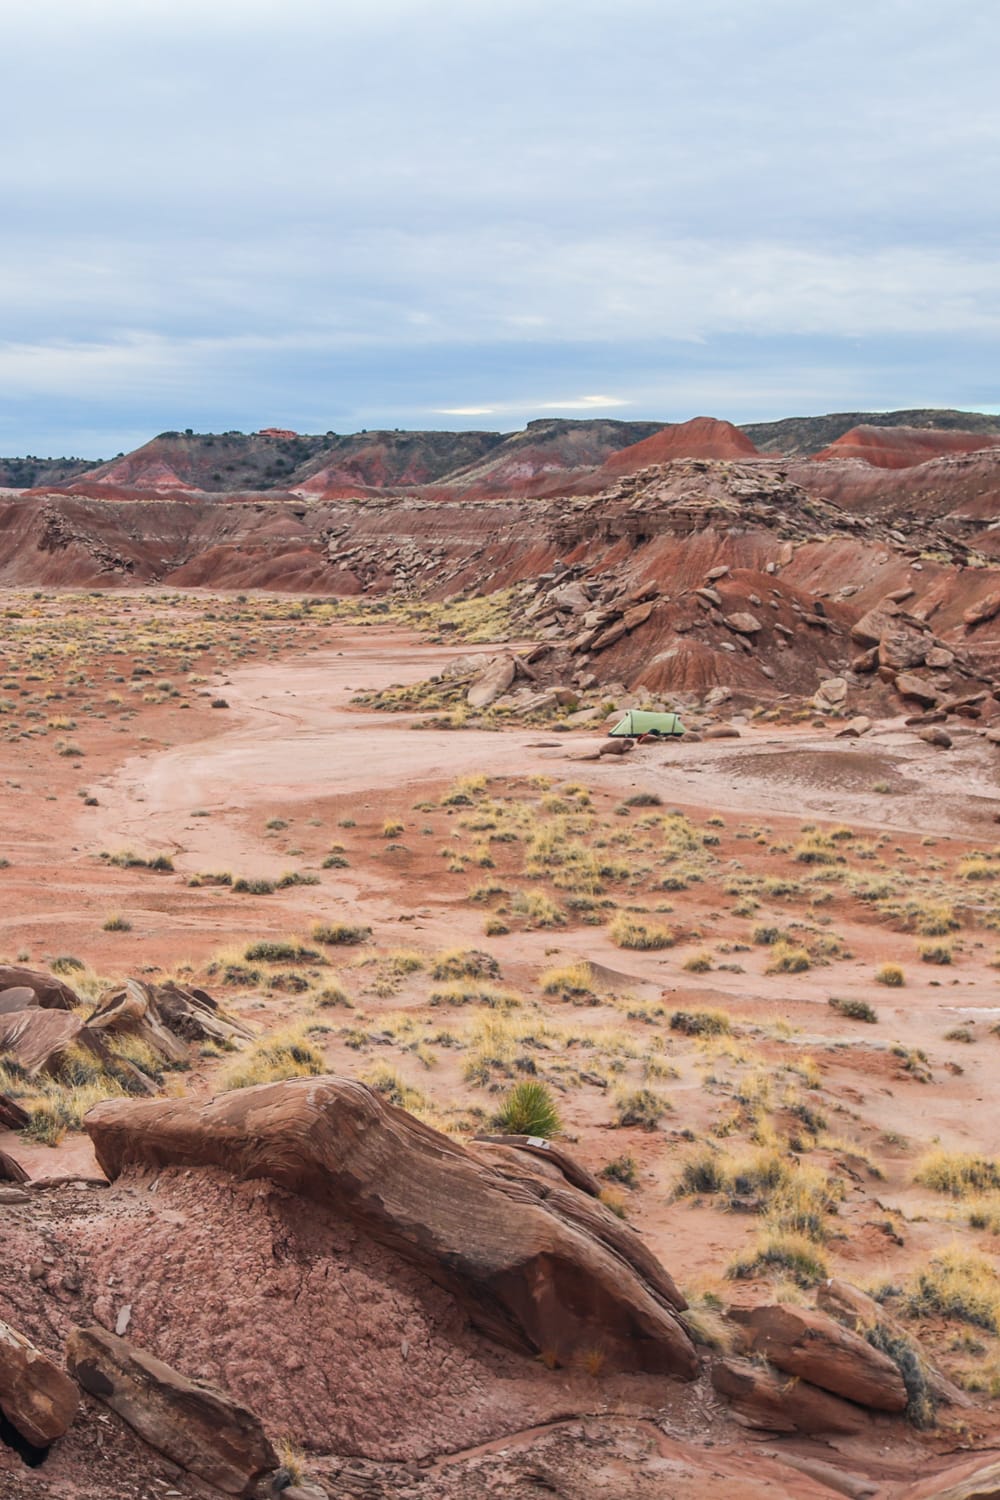 Camping in the Painted Desert, Images of Petrified Forest National Park